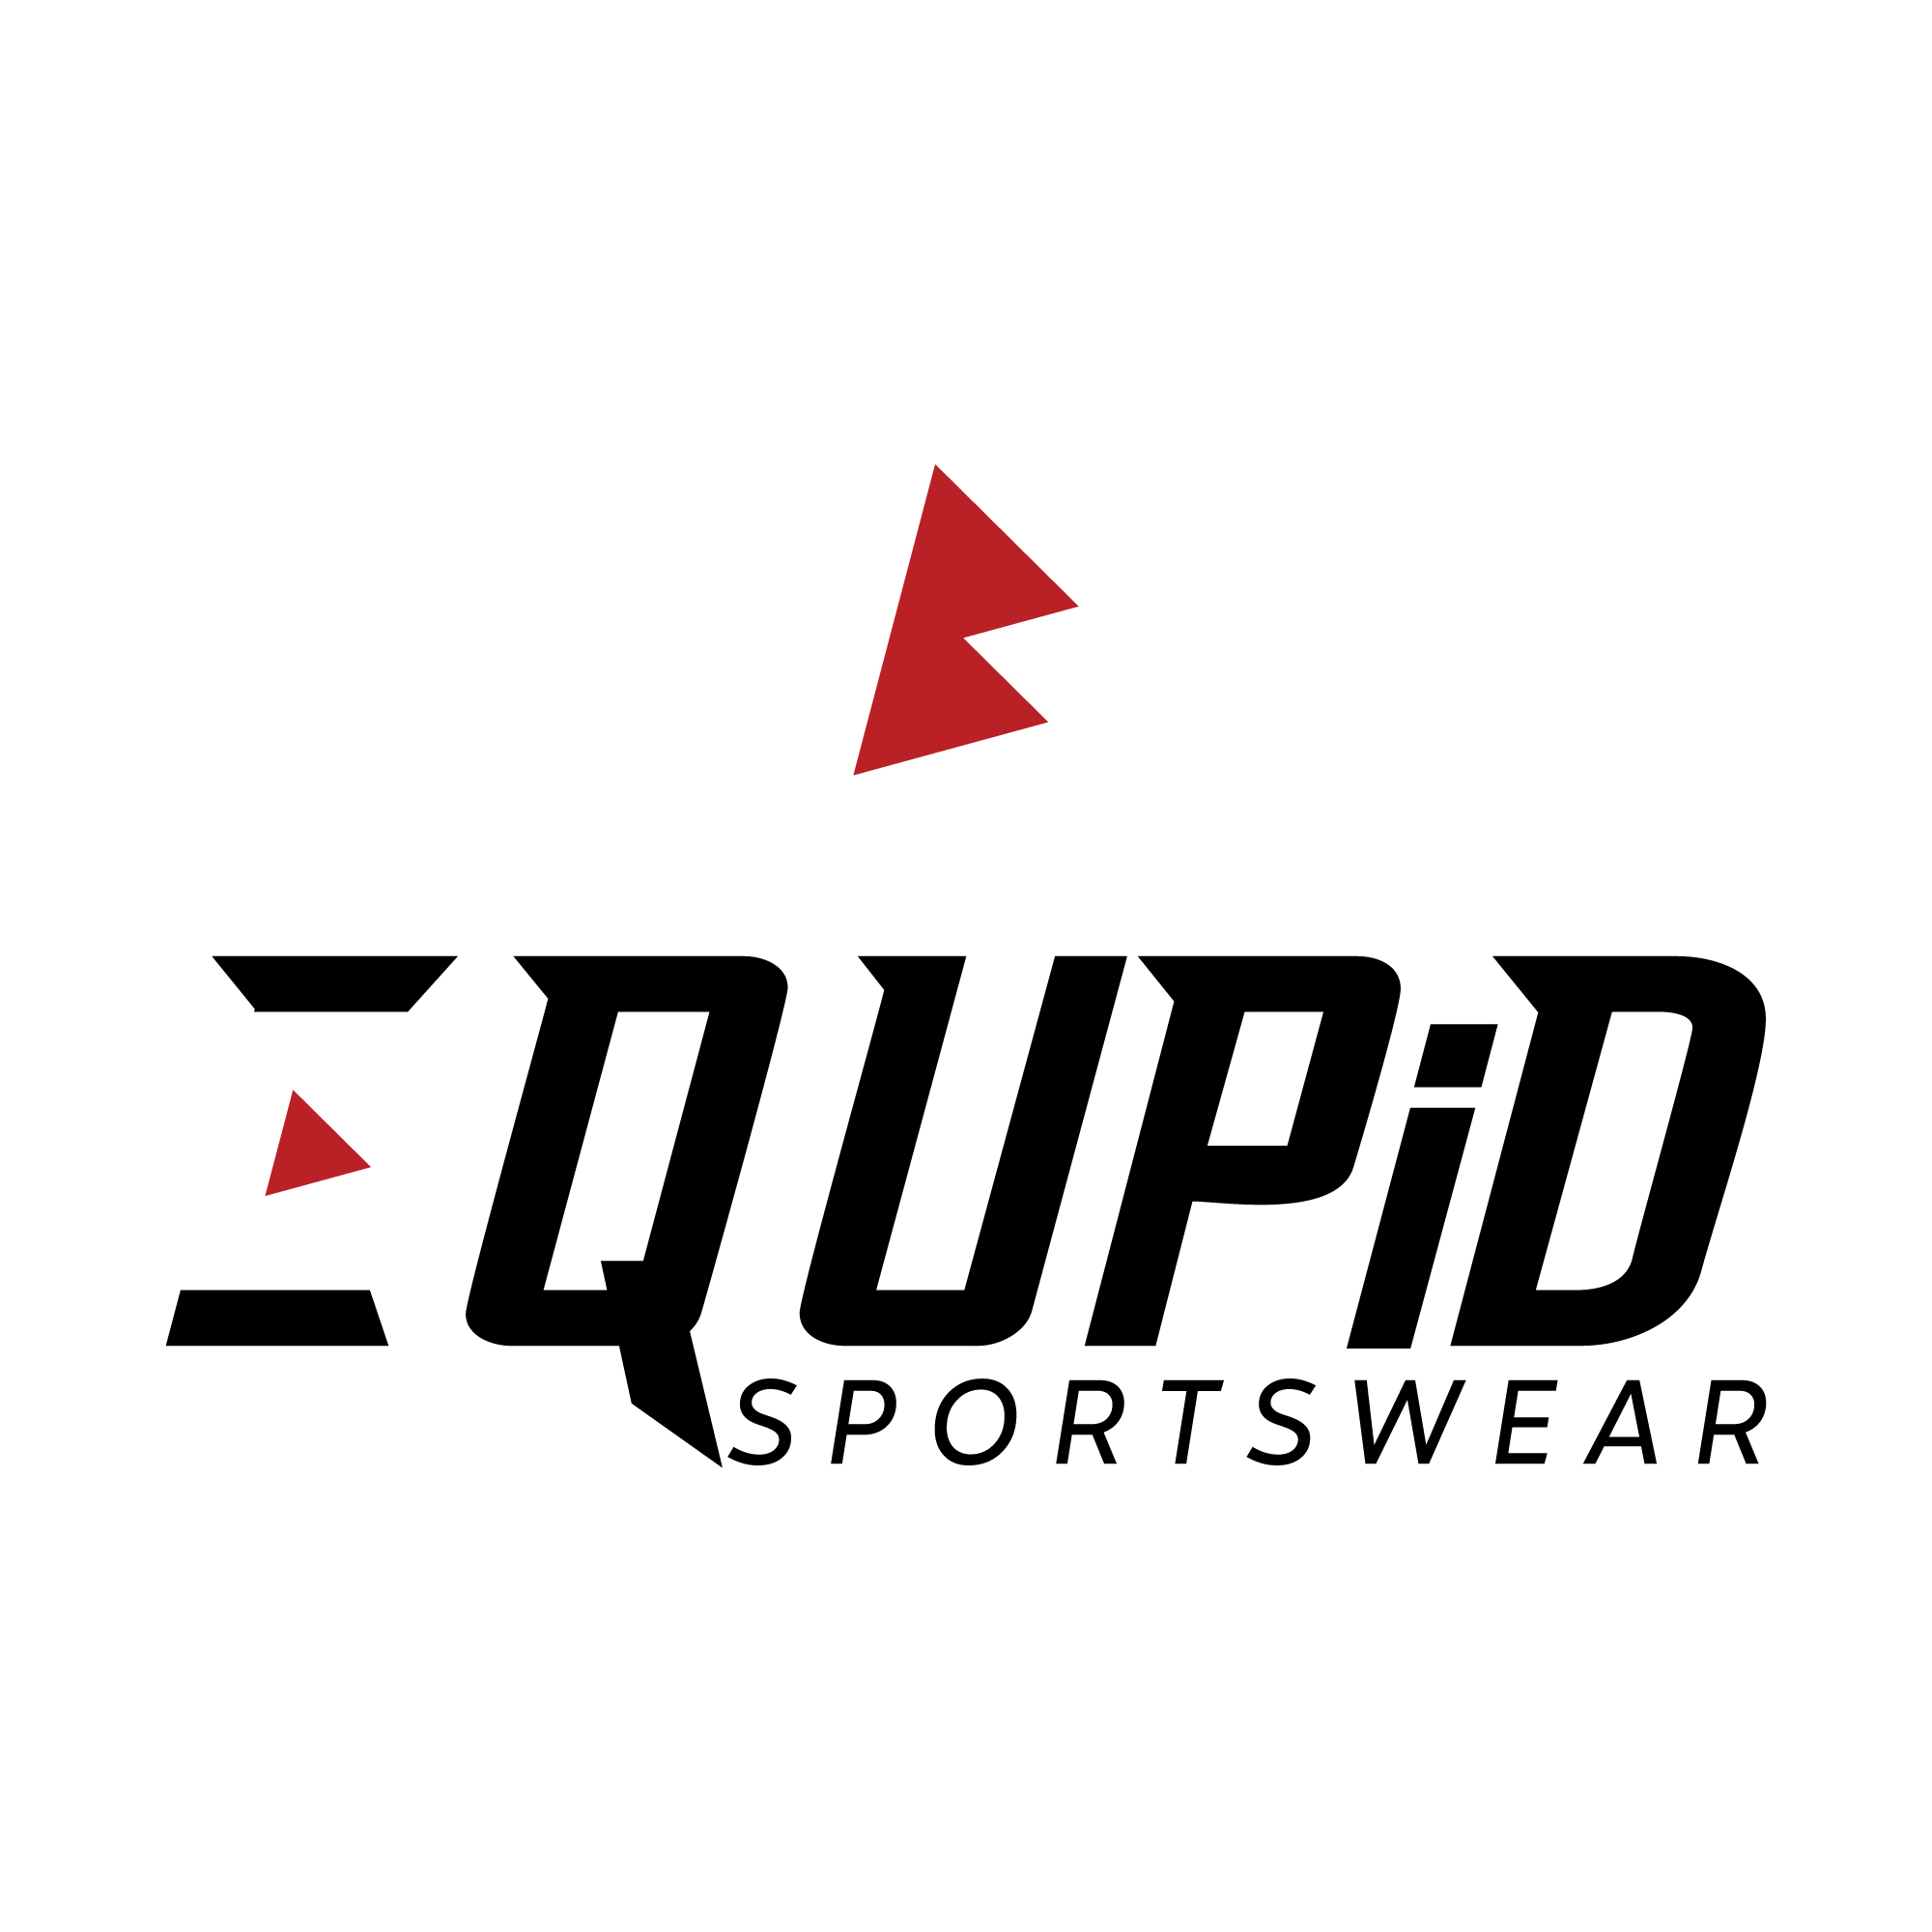 Black and red logo with the words equipd sportswear.